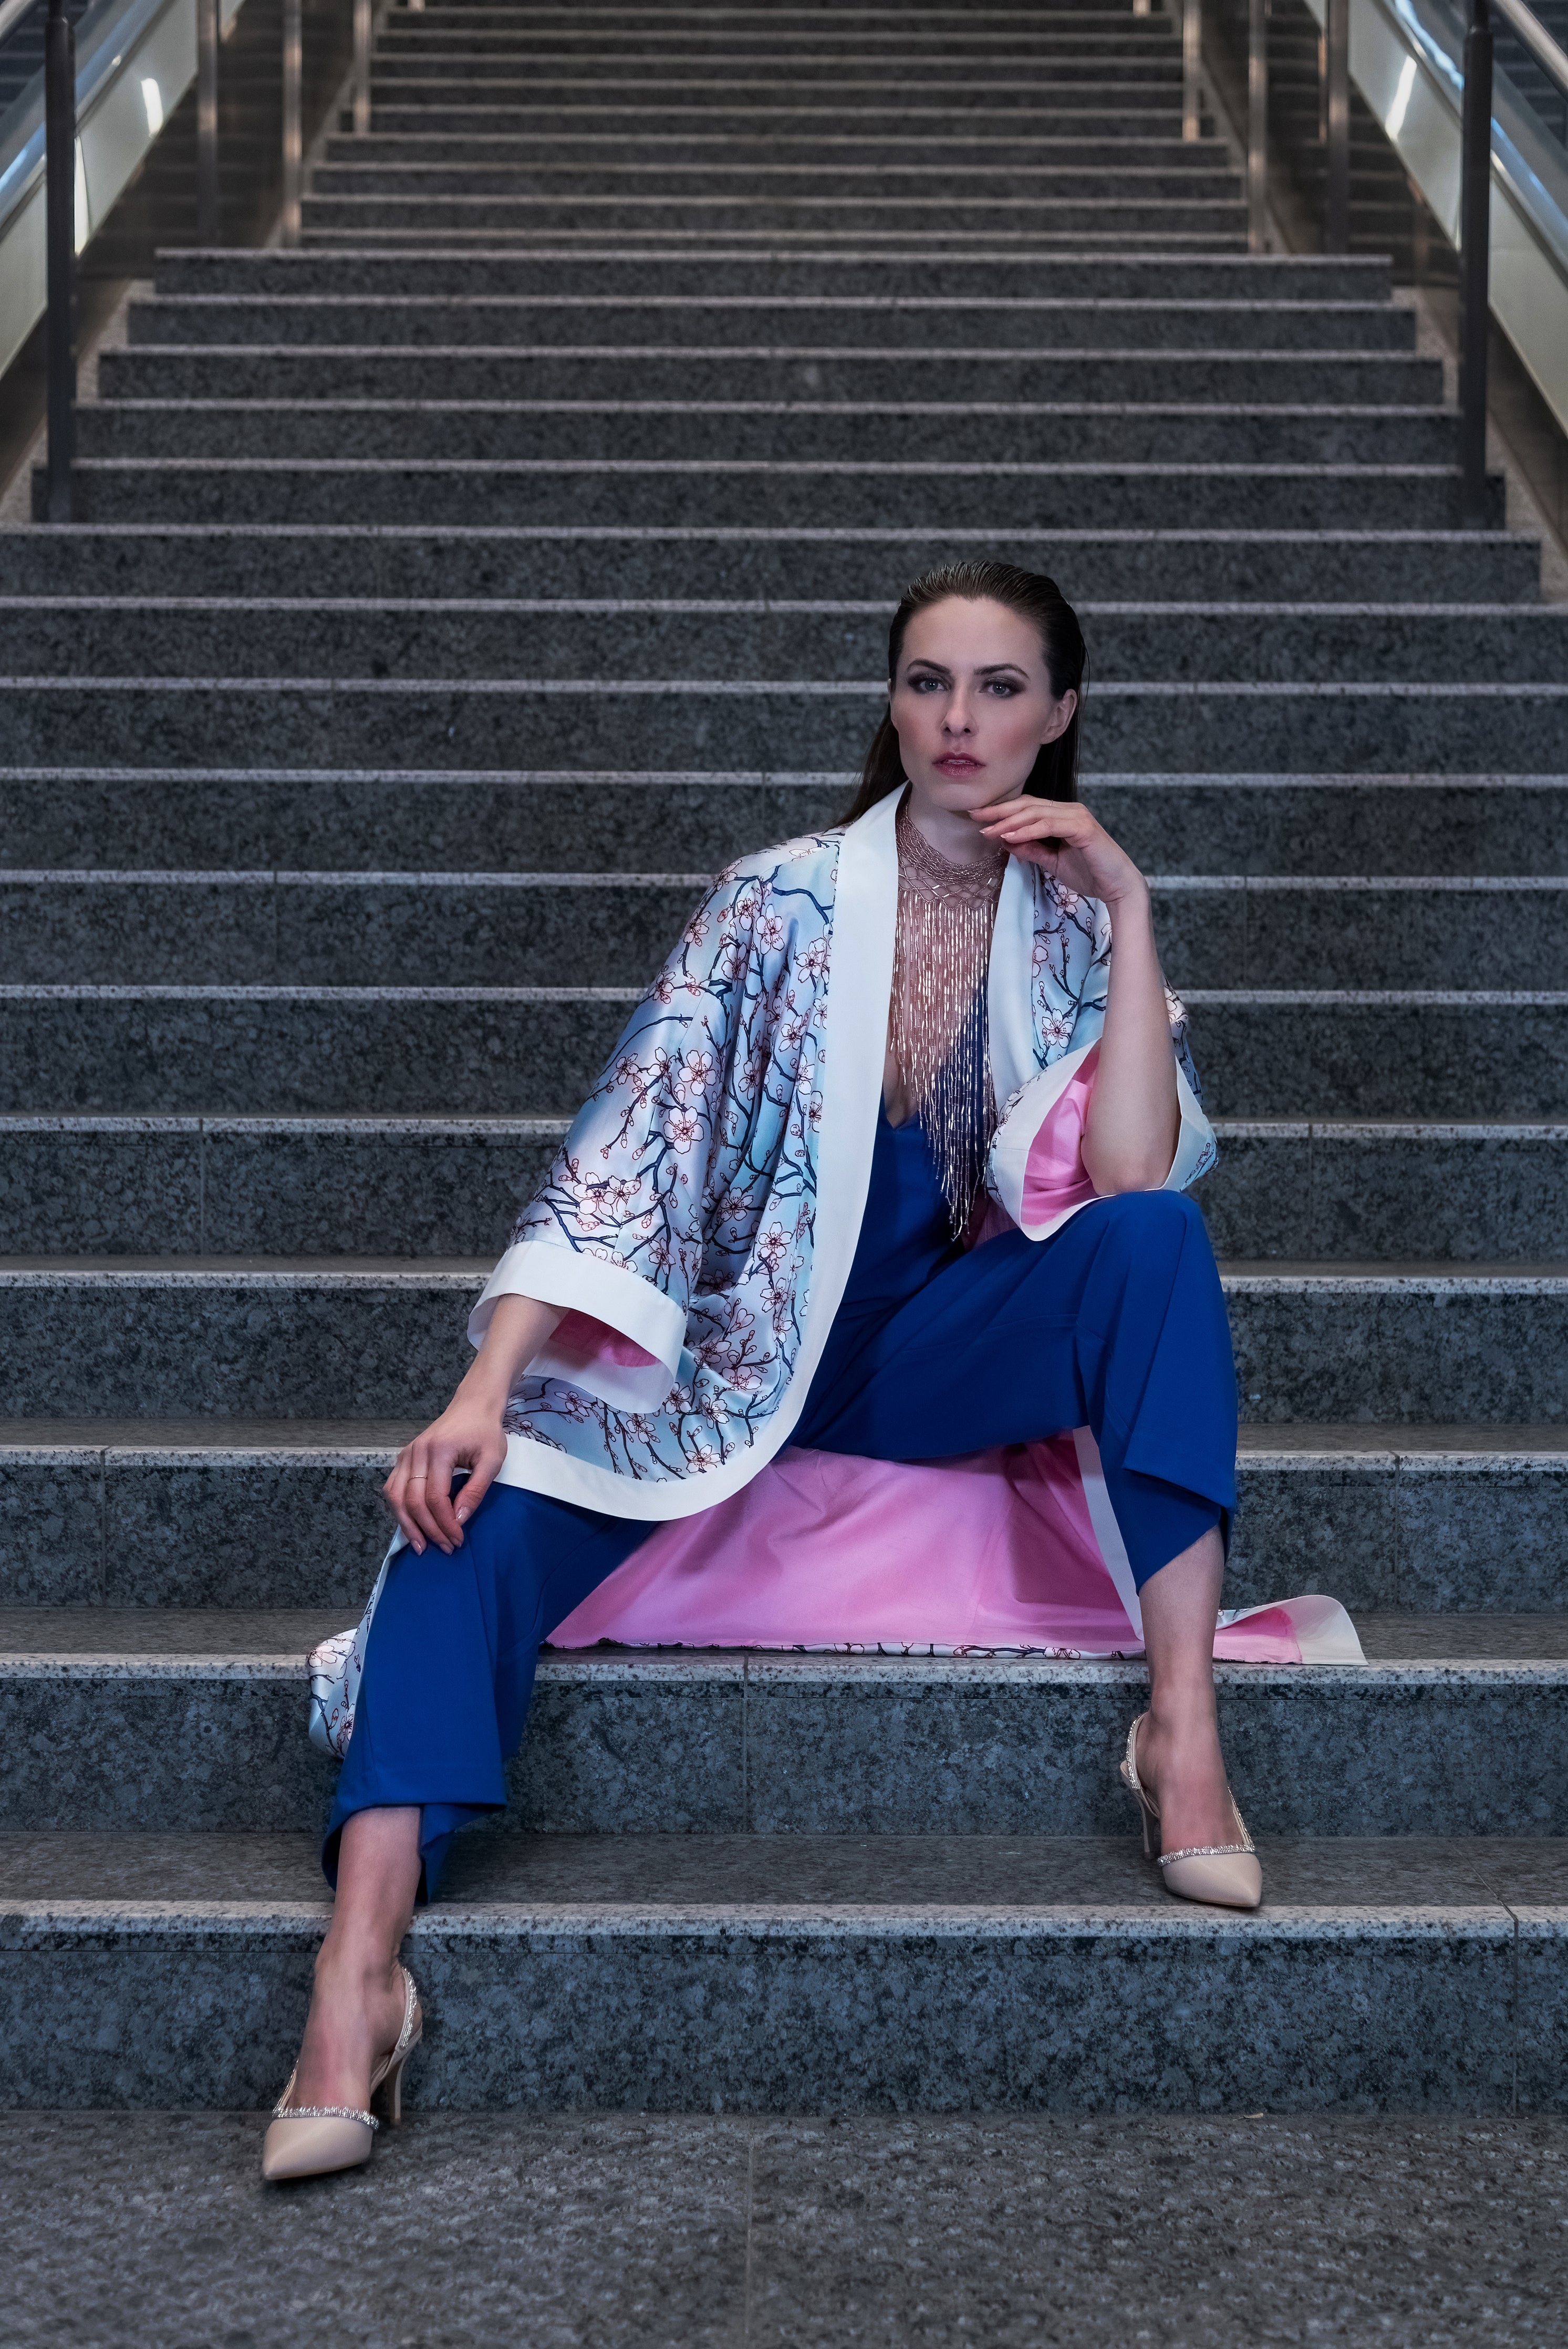 A model sits on stairs, wearing a pink kimono with a bold cherry blossom pattern visible on the outside. The pink lining shows through on the inside.